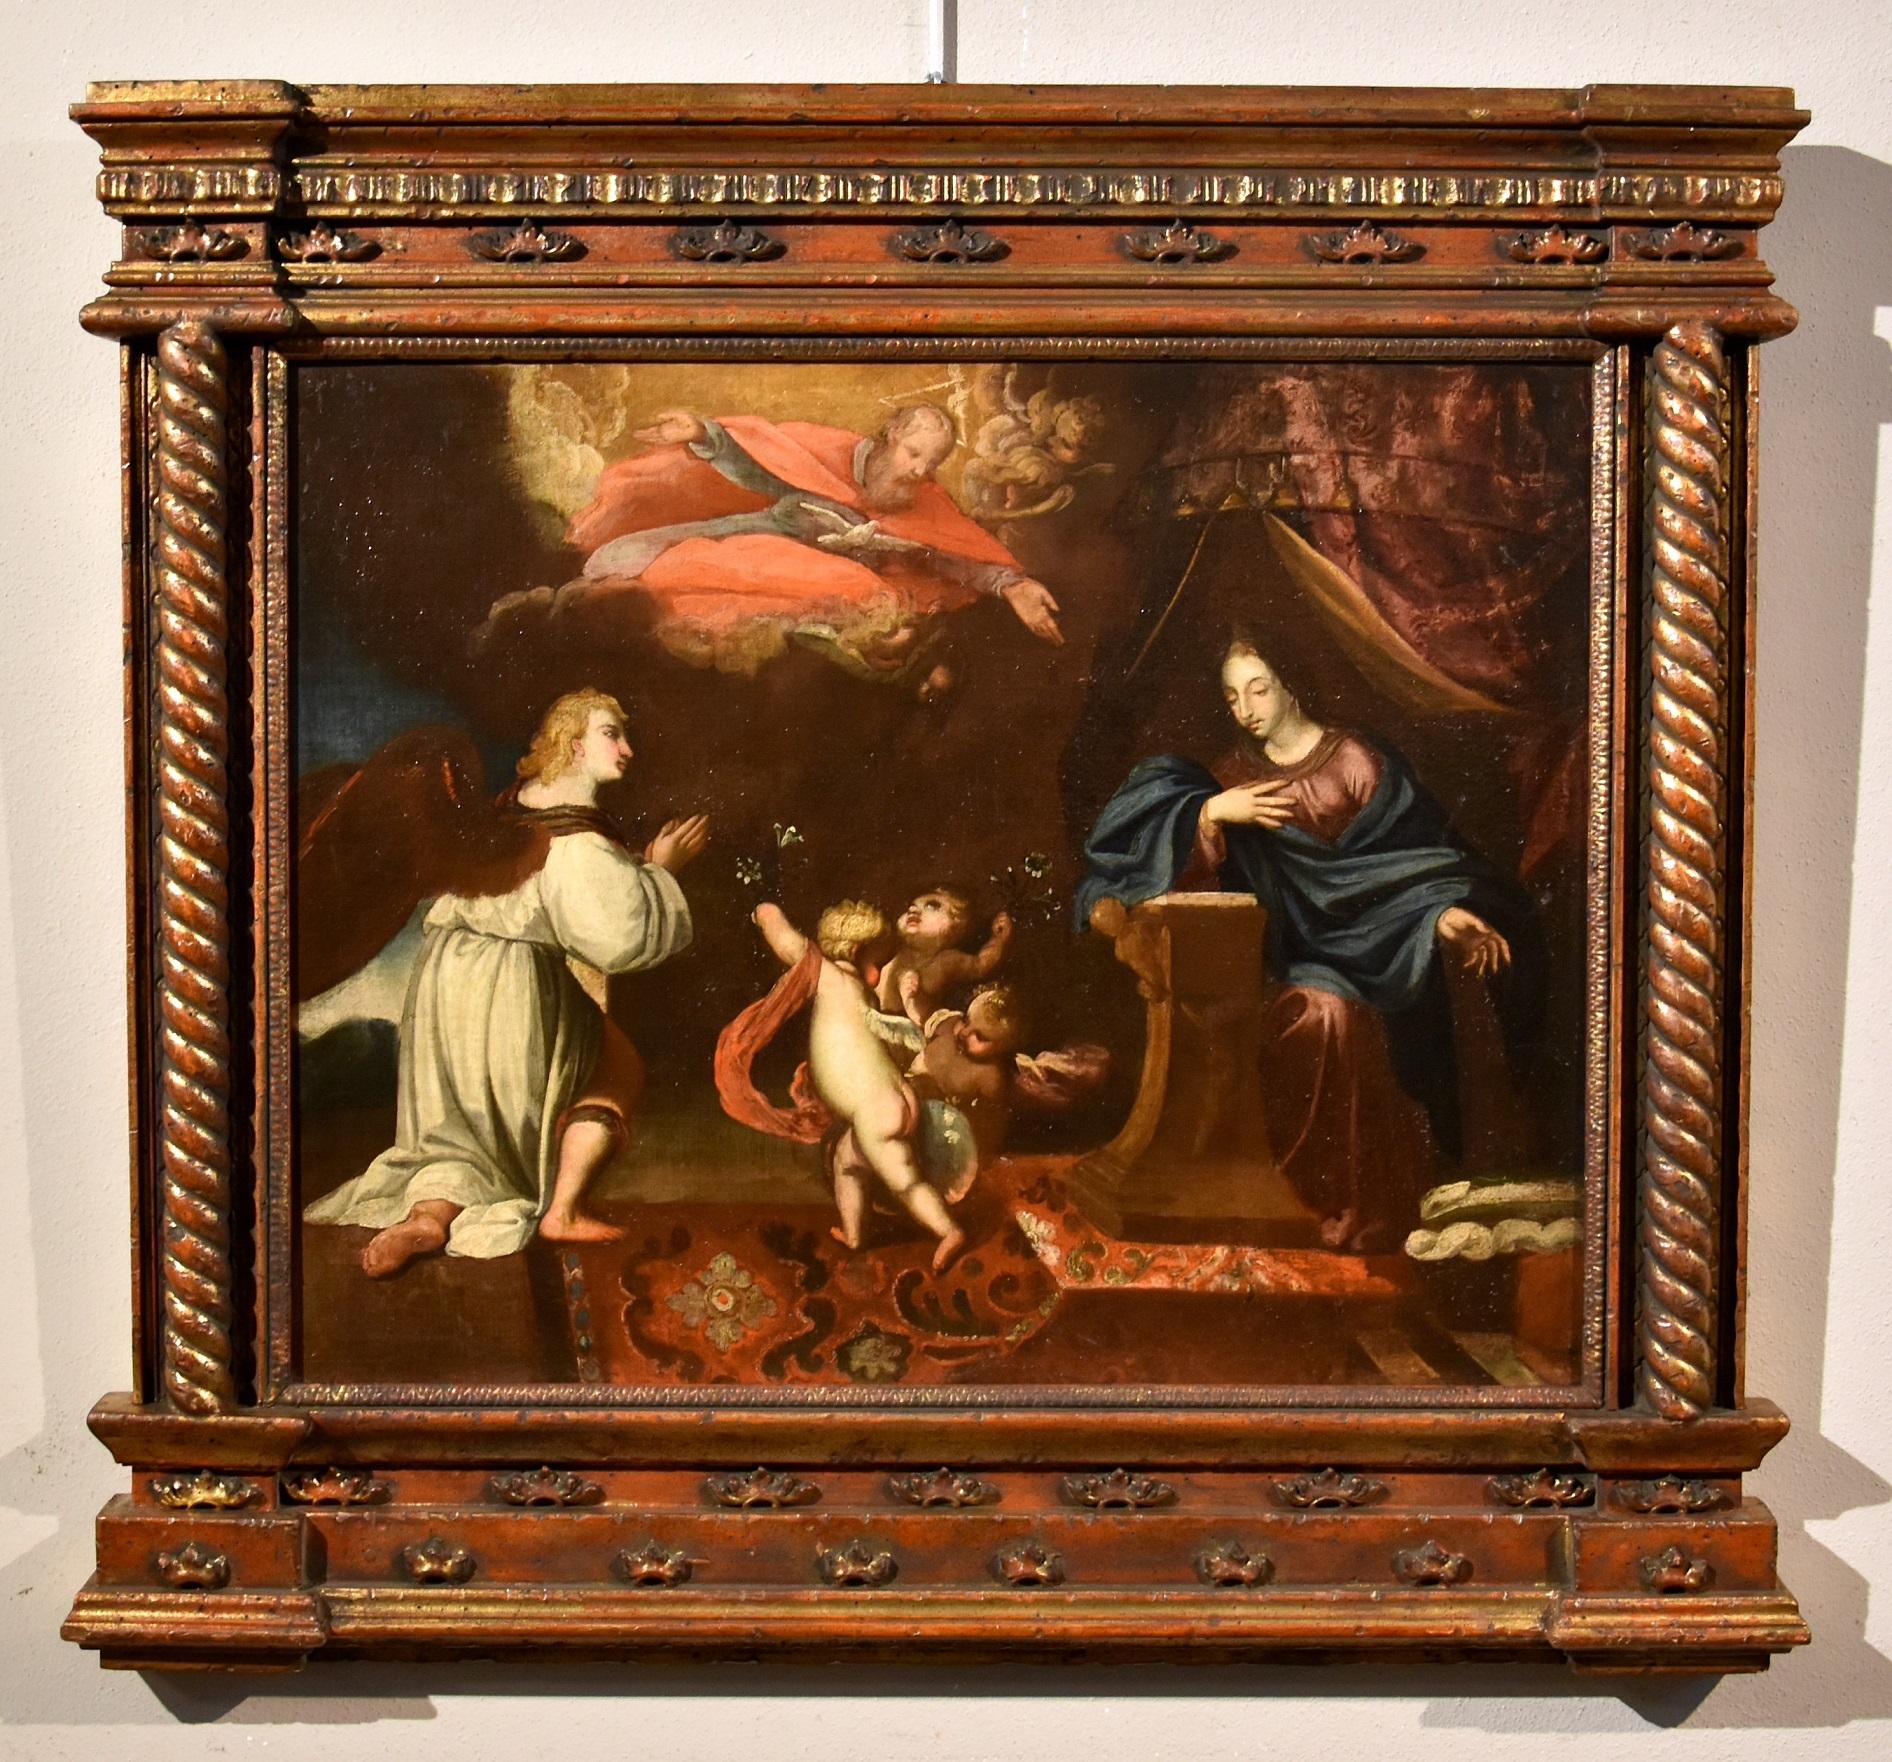 Venetian school of the seventeenth century Landscape Painting - Annunciation Venetian 17th Century Paint Oil on canvas Old master Religious Art